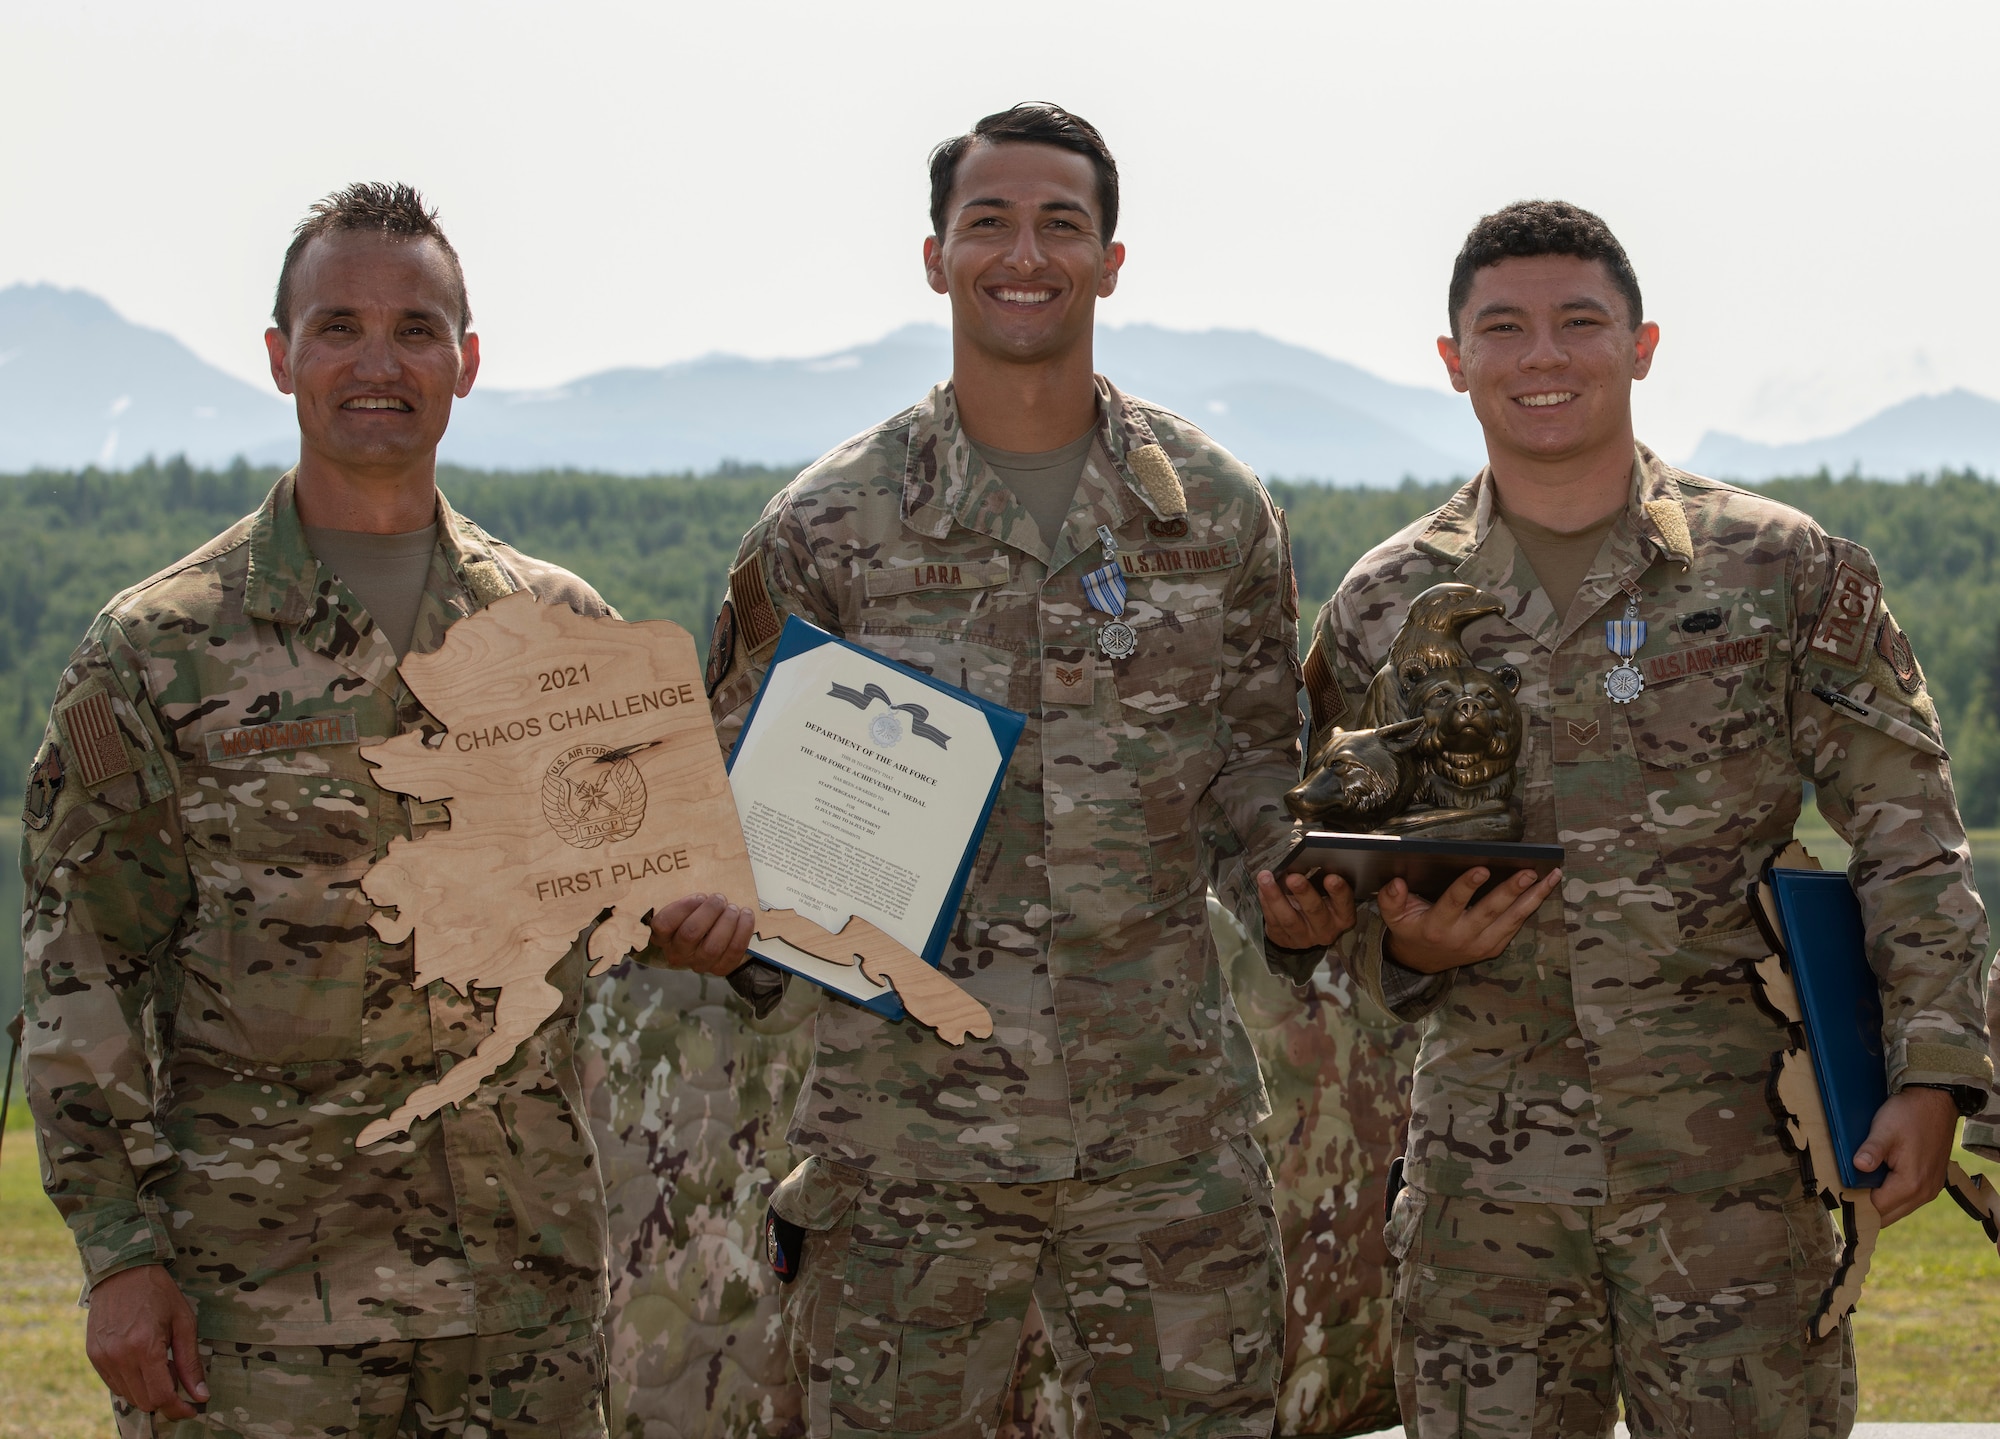 U.S. Air Force Col. Travis Woodworth, left, Commander, 1st Air Support Operations Group pauses for photo with the winners of the Chaos Challenge 2021, Staff Sgt. Jacob Lara, center, and Senior Airman Matthew Arellano, 25th Air Support Operations Squadron at Joint Base Elmendorf-Richardson, Alaska, July 16, 2021. The Chaos Challenge 2021 was a multi-day series of mental and physical contests sponsored by the 1st Air Support Operations Group with participants from the 3rd, 5th, 25th, and 604th Air Support Operations Squadrons and a guest team from the 673d Security Forces Squadron. The winner of the competition will go on to compete in Lightning Challenge 2021 to determine the best two-man TACP team in the Air Force.